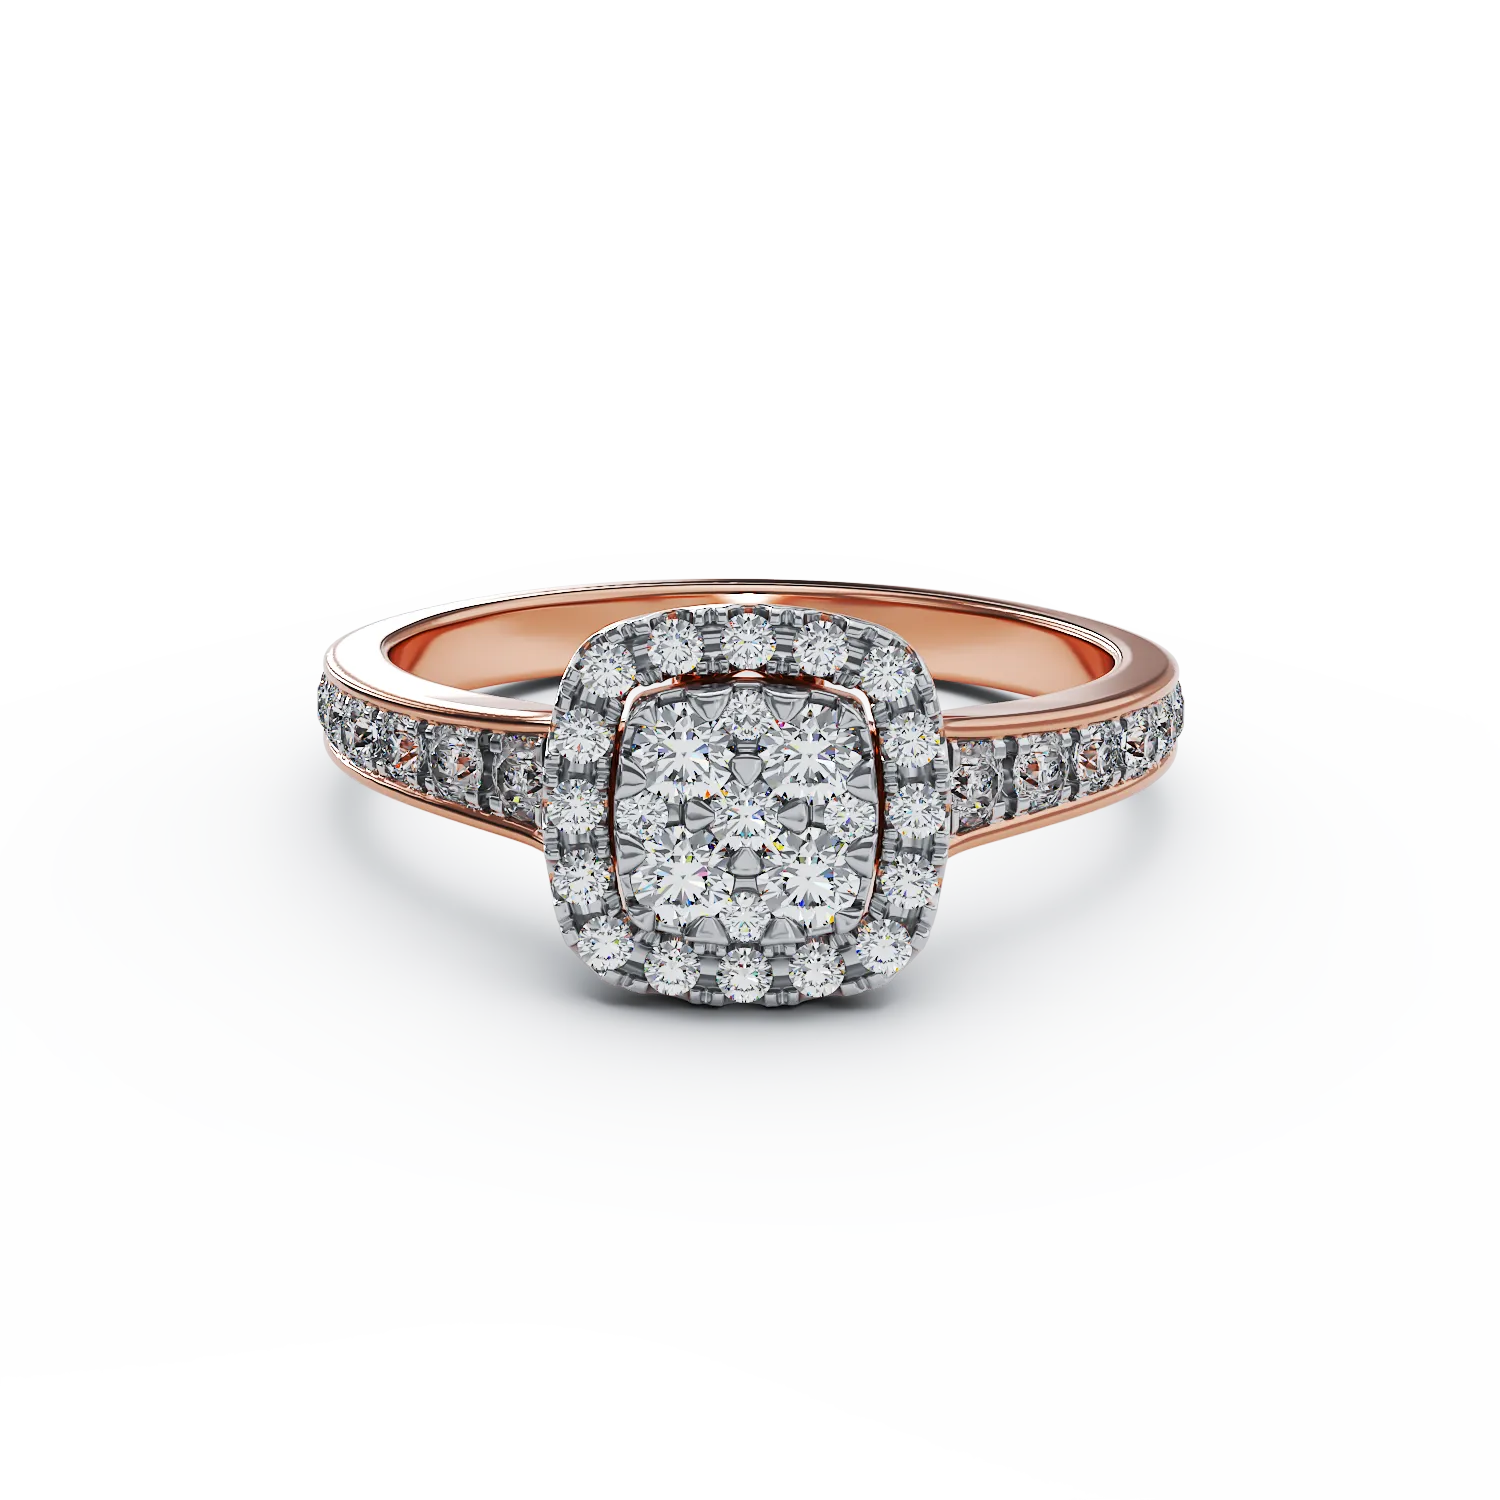 18K rose gold engagement ring with 0.52ct diamonds